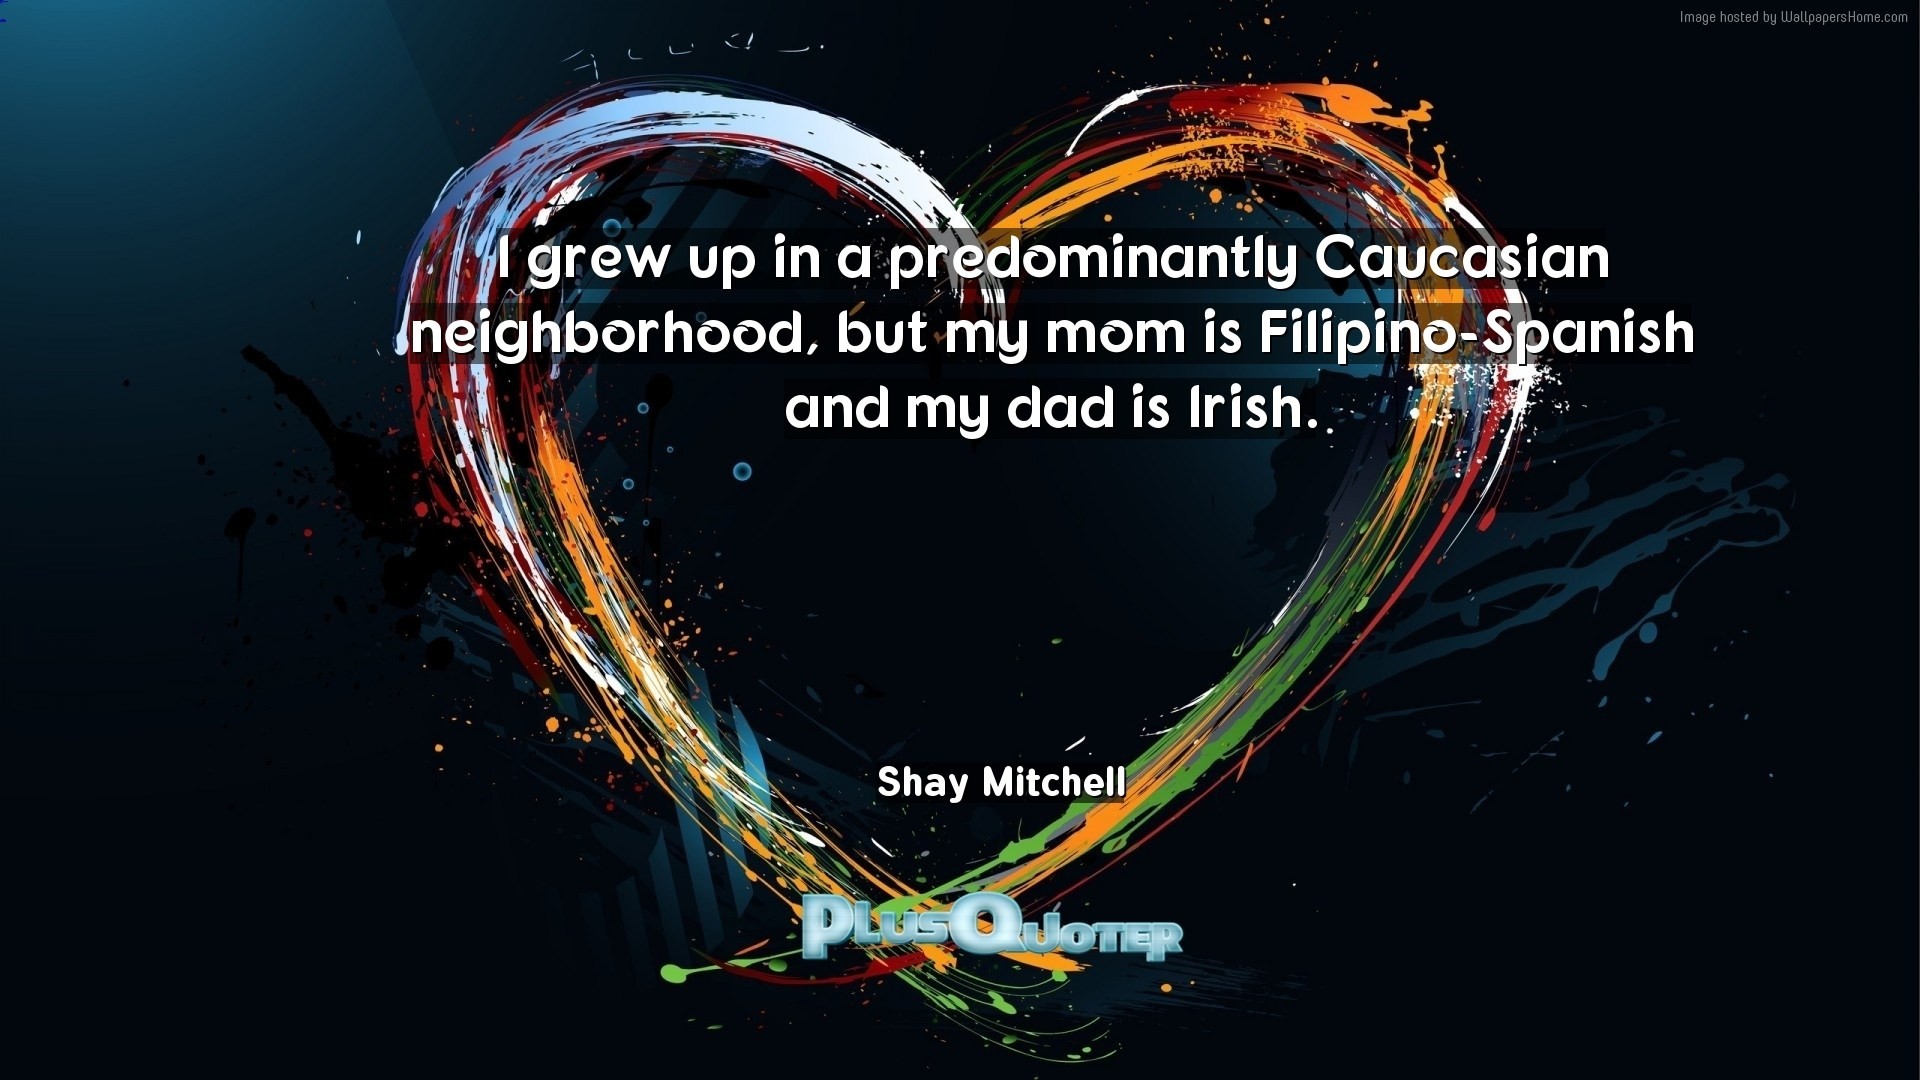 1920x1080 Download Wallpaper with inspirational Quotes- "I grew up in a predominantly  Caucasian neighborhood,